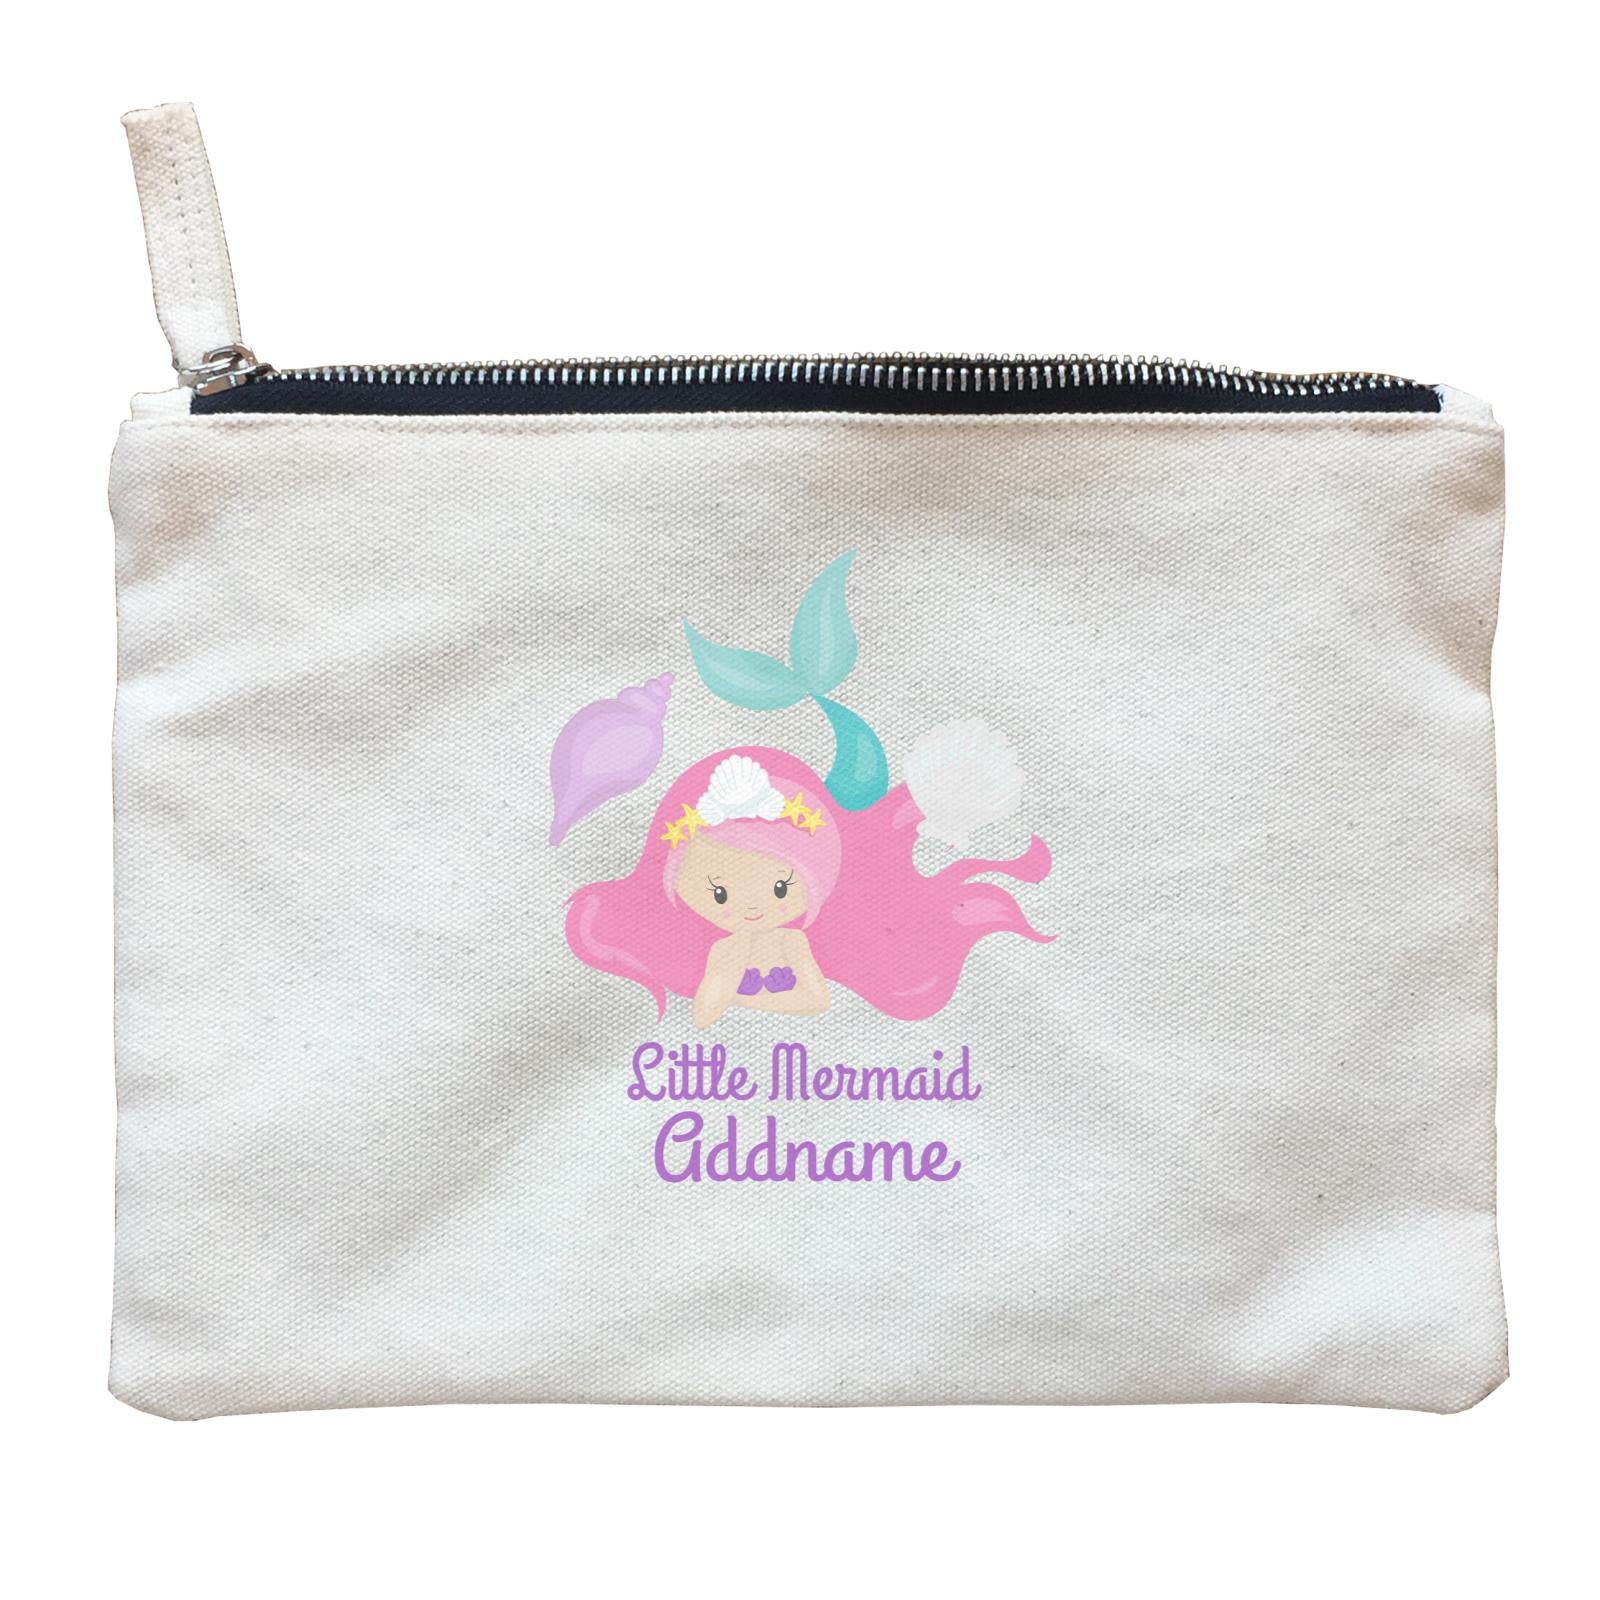 Little Mermaid Lying Down with Seashells Addname Zipper Pouch